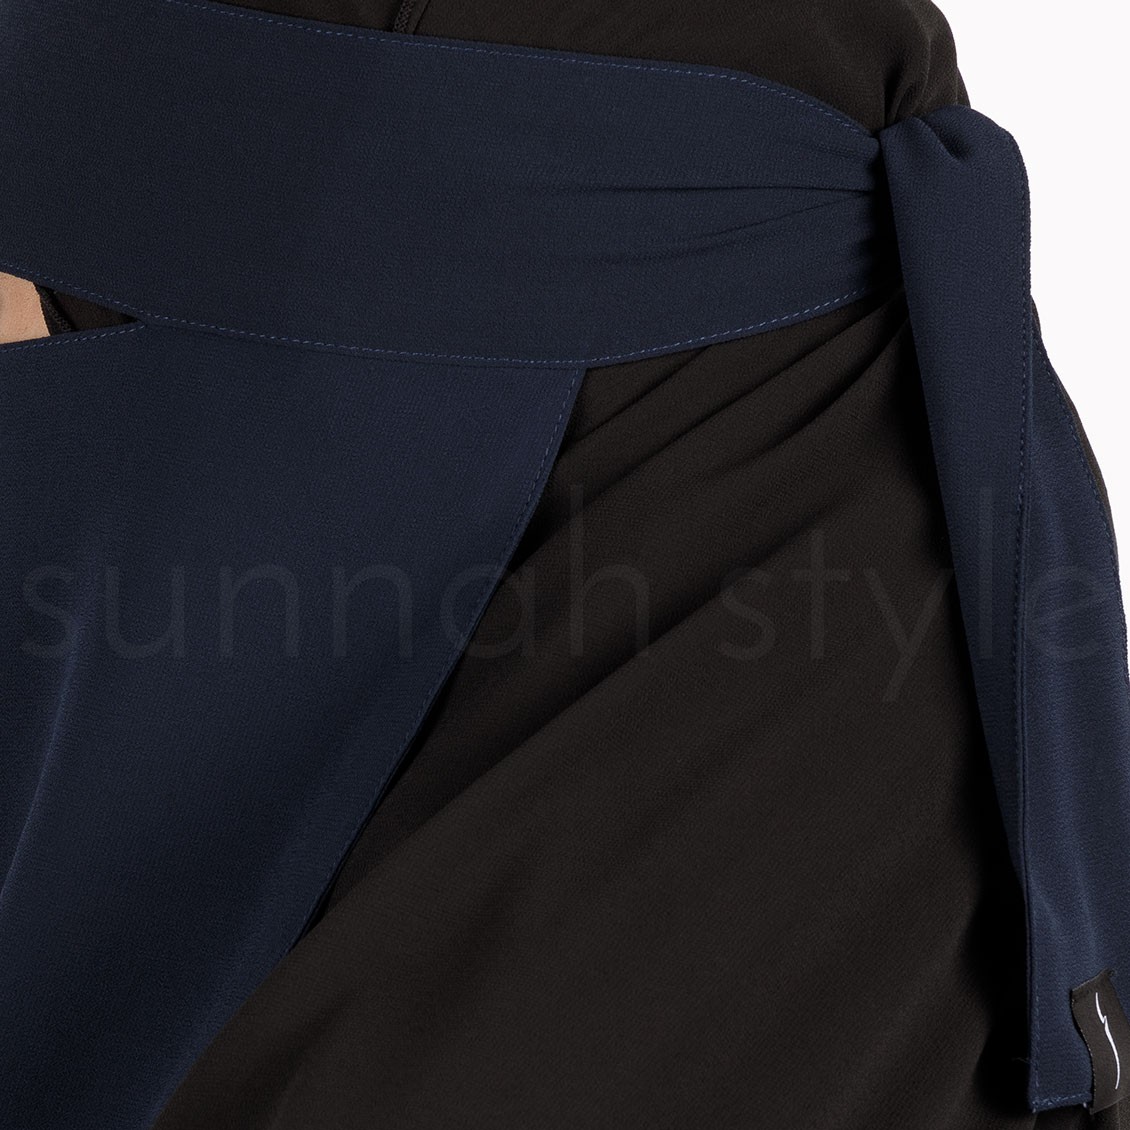 Sunnah Style Pebble One Layer Niqab Navy Blue